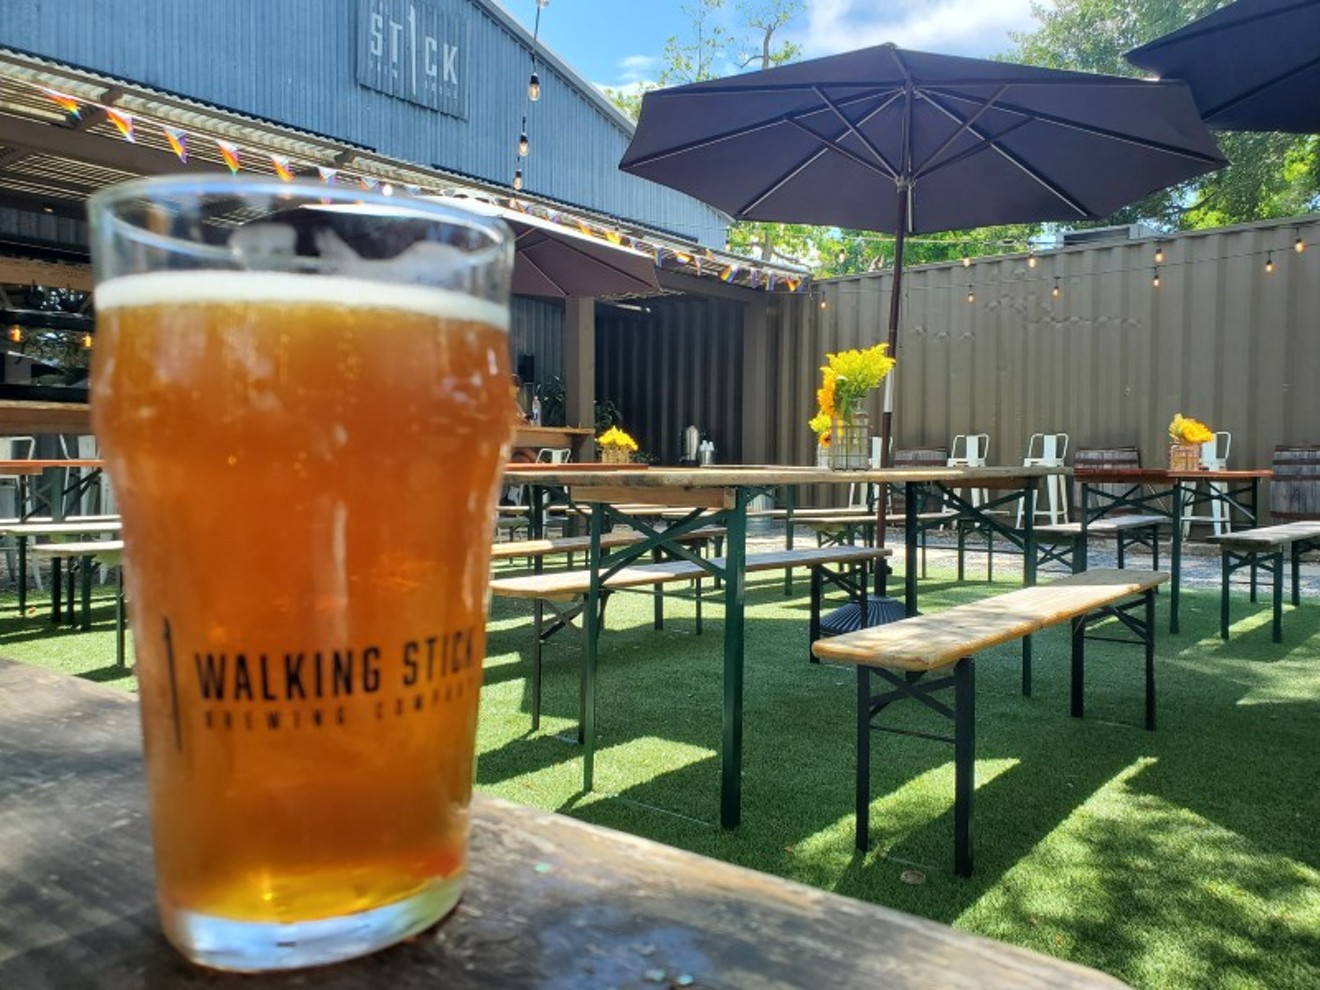 Walking Stick Brewing Co. boasts a pair of beer gardens